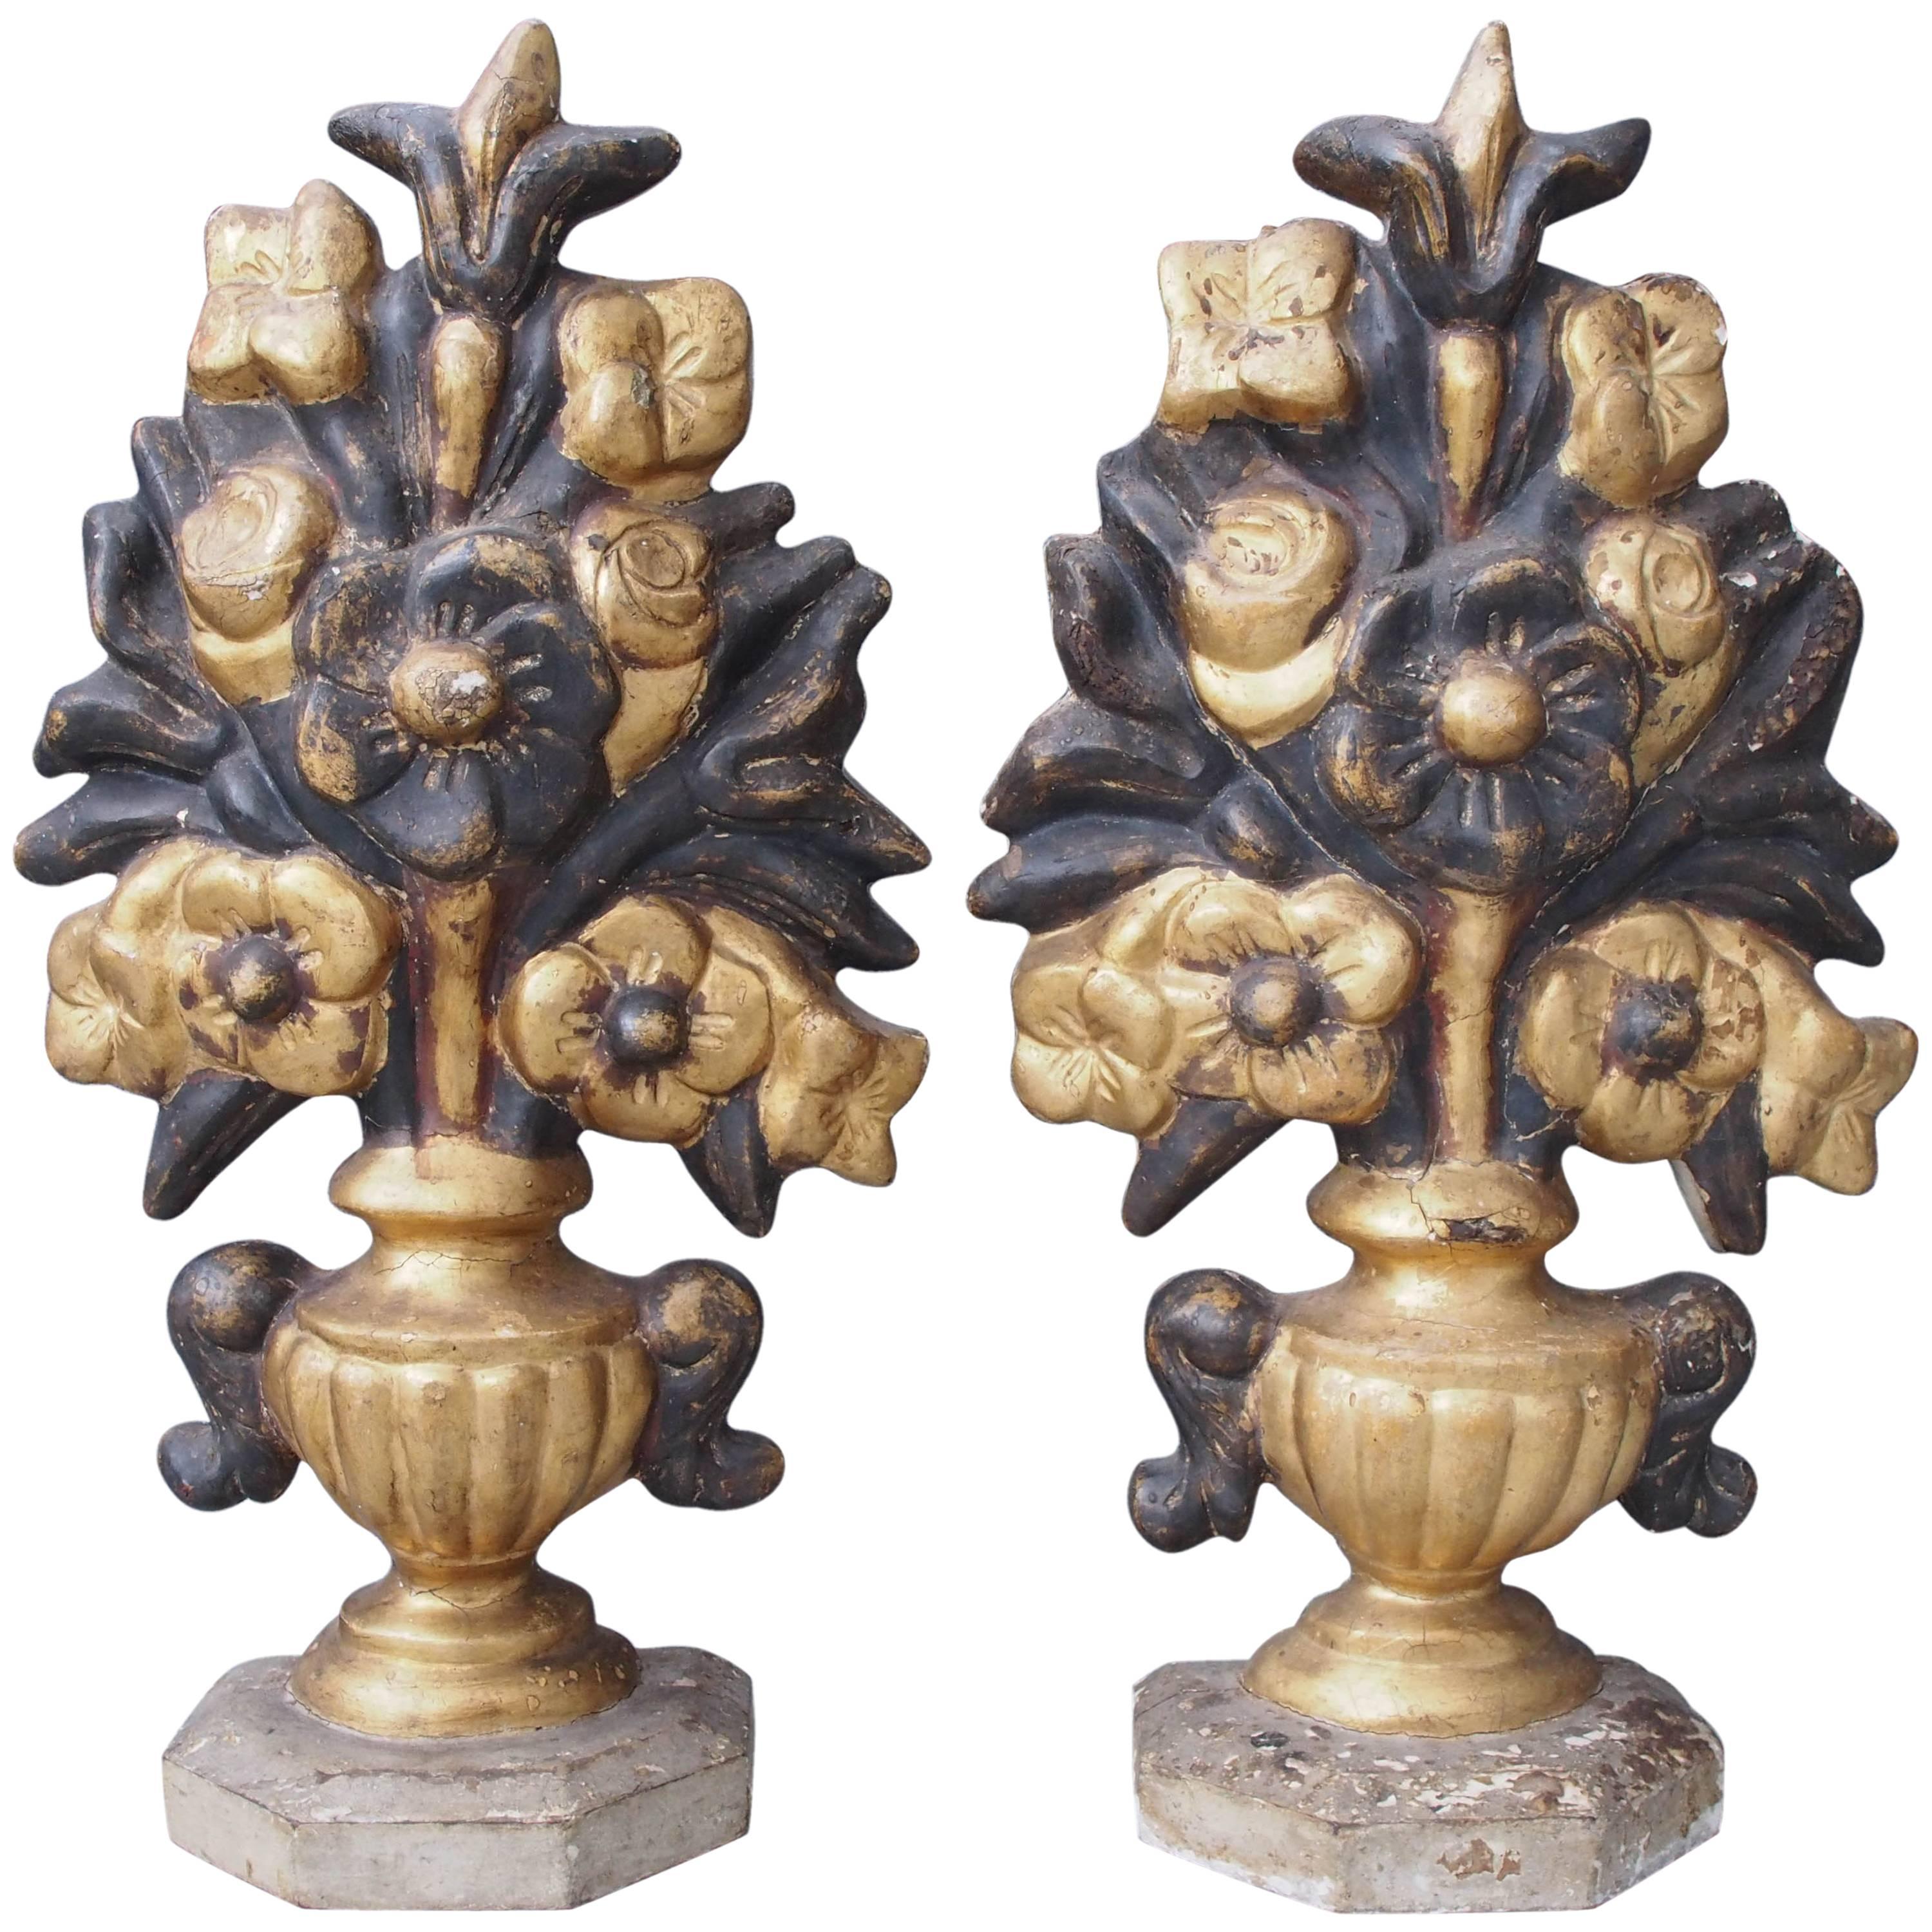 Pair of Italian Carved Giltwood Vases with Flowers